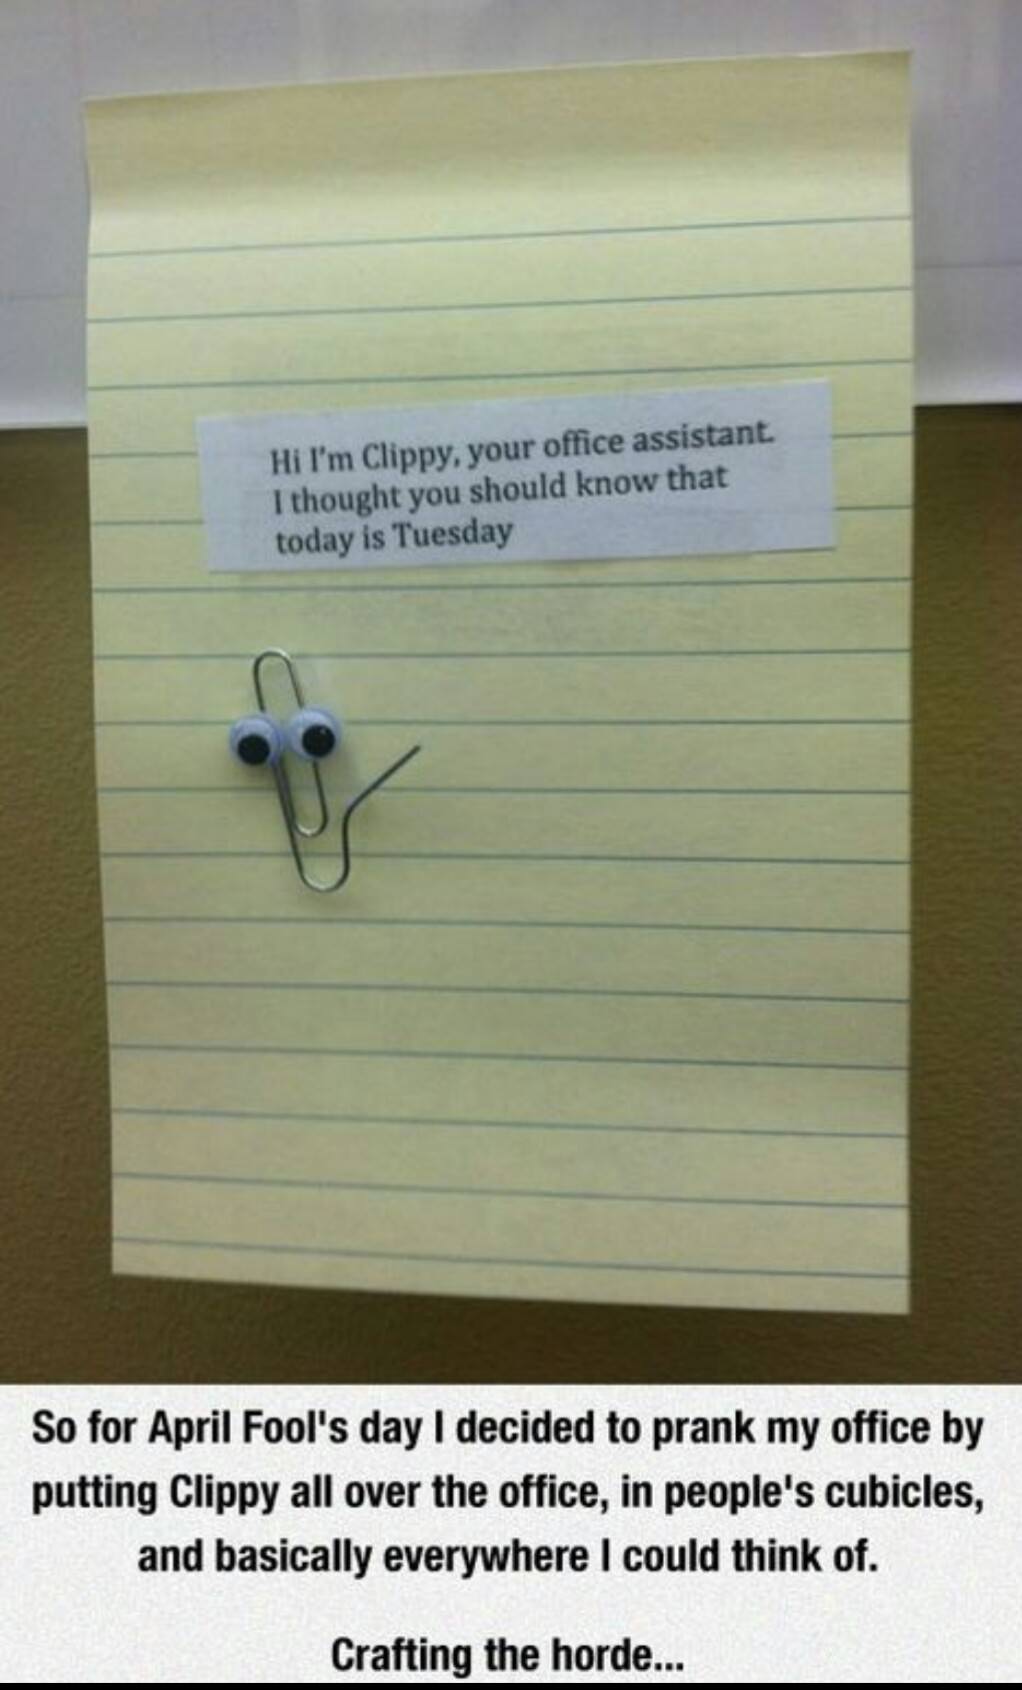 Cool April Fools Pranks That's Both Nostalgic And Harmless For The Office